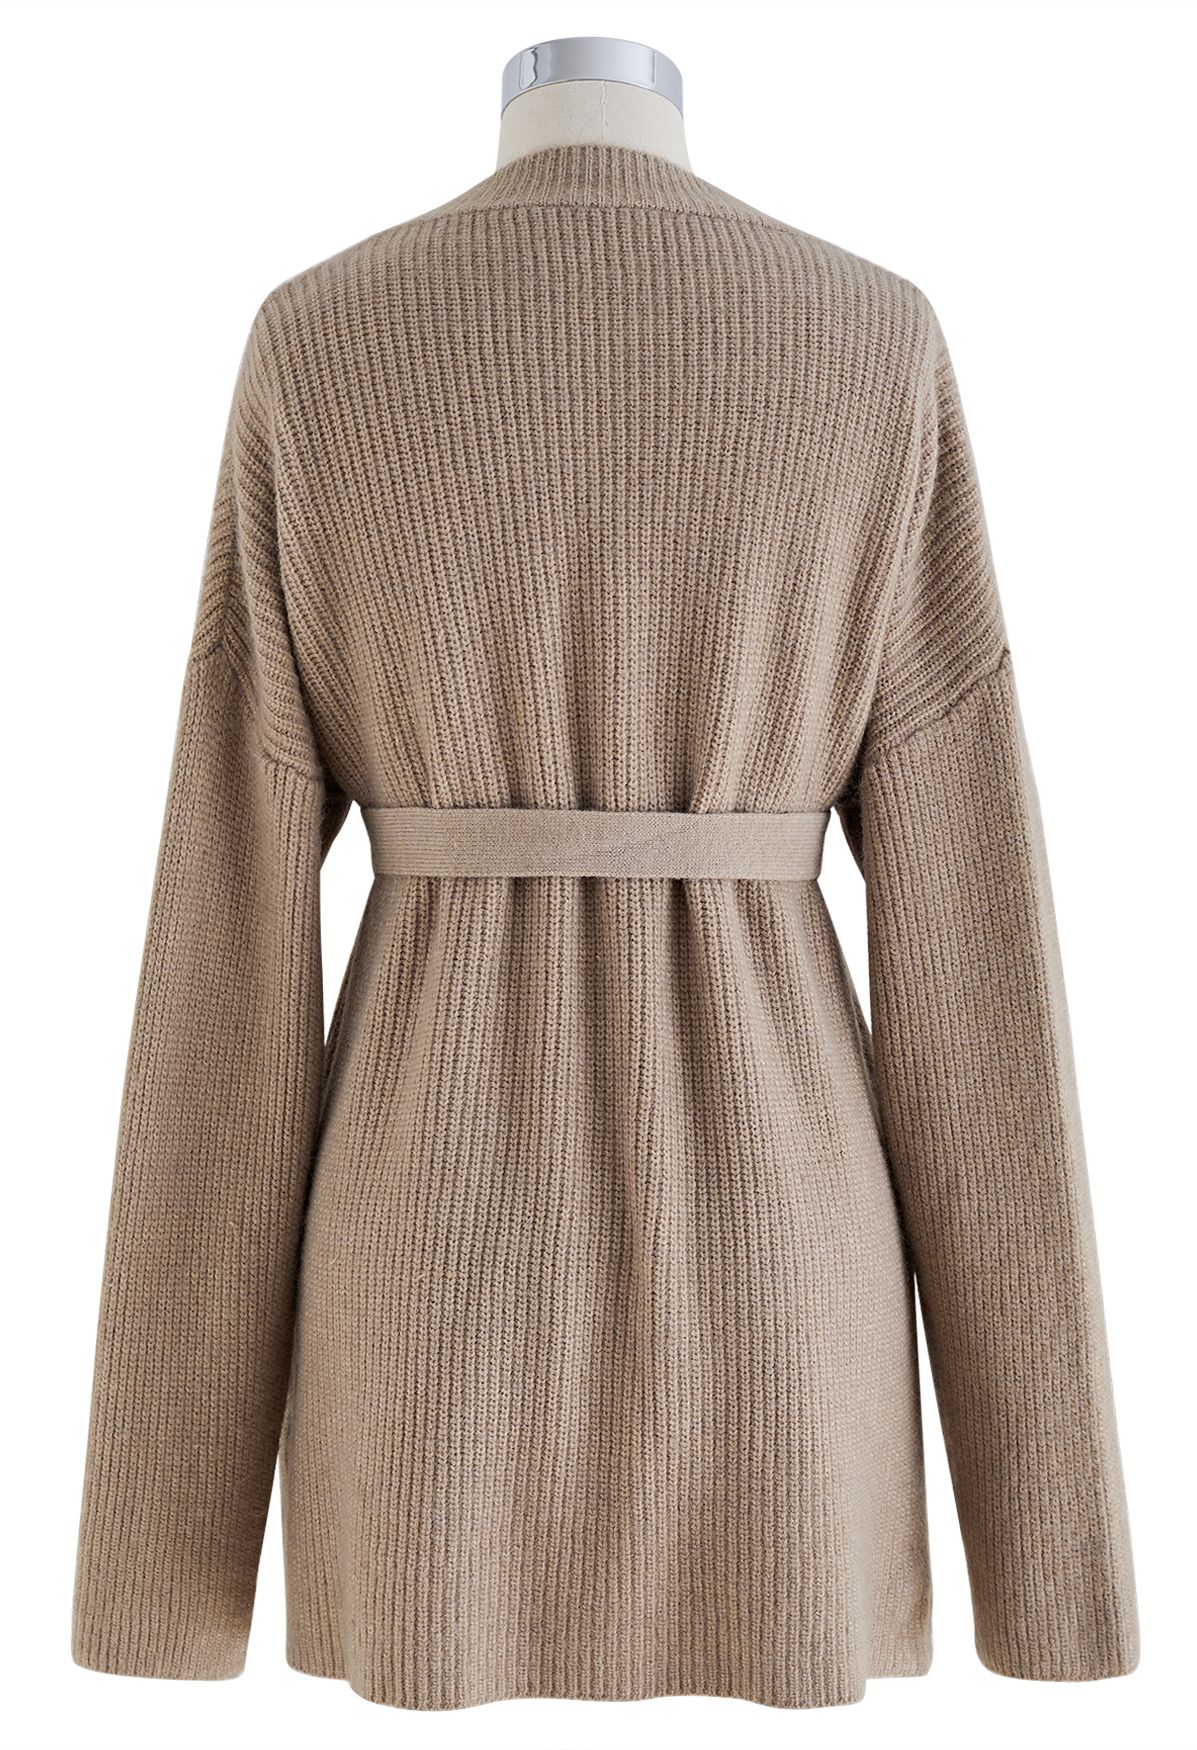 Belted Ribbed Longline Sweater in Tan